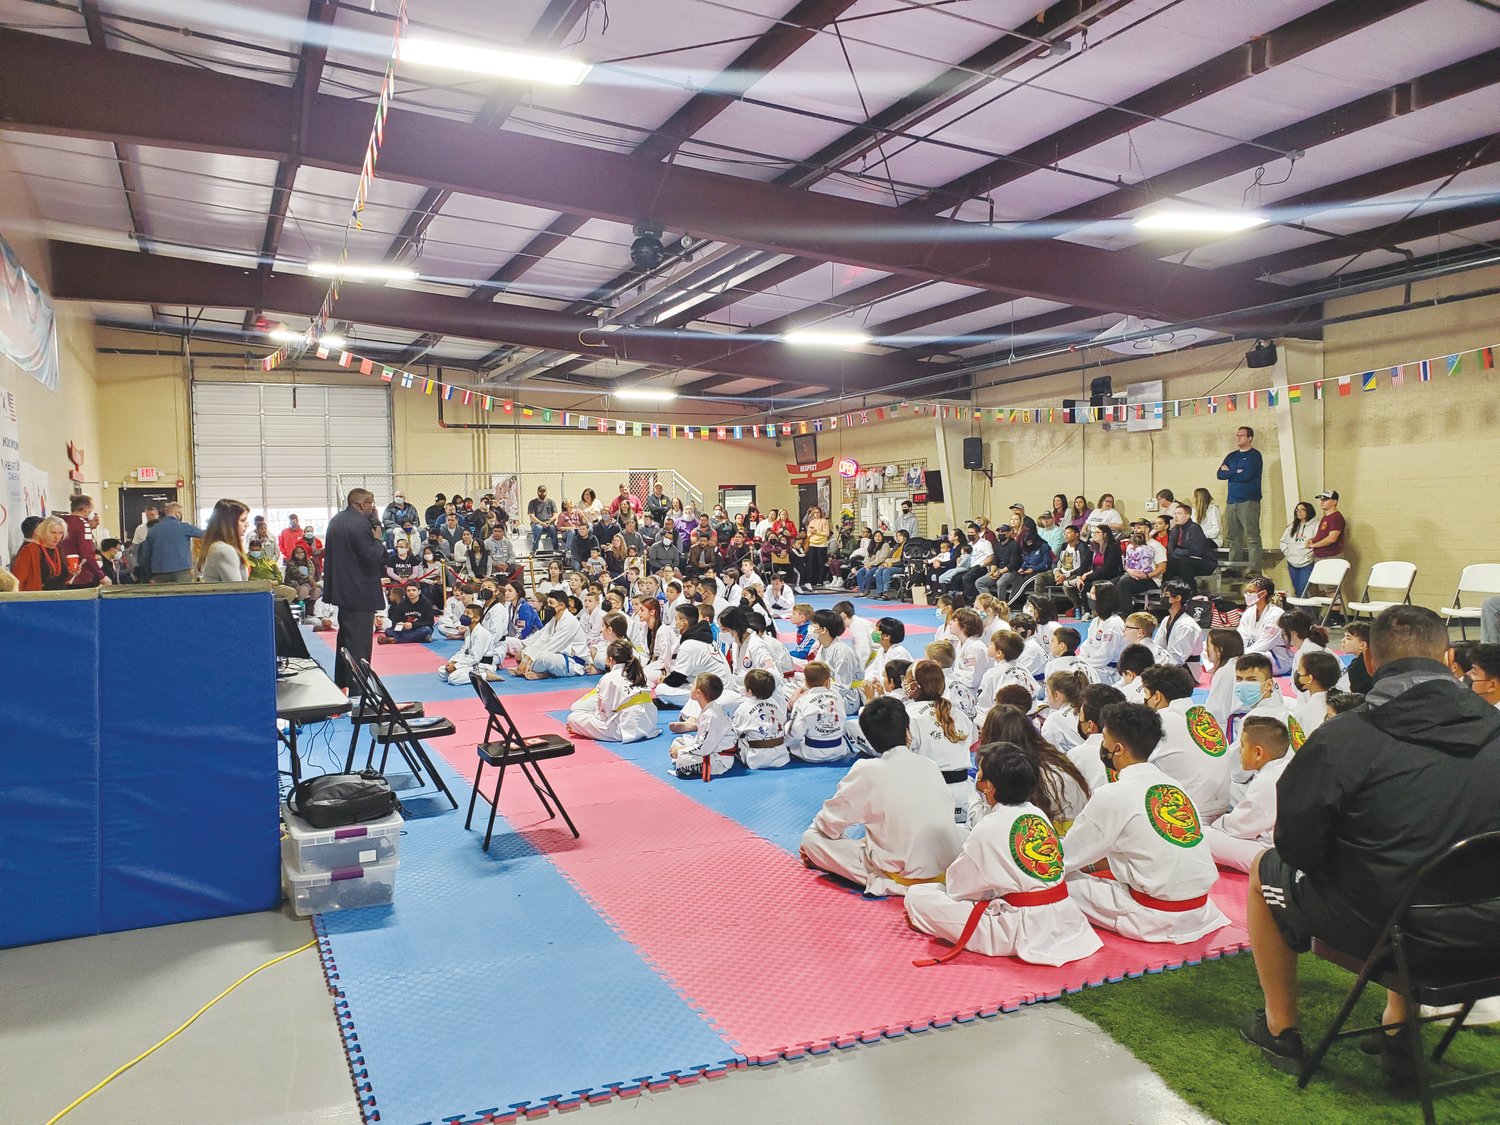 Competitors gather on the mat at A.F.E. Taekwondo in Siler City ahead of the 2021 AFE Winter Games, which featured over 135 participants competing in three event styles.